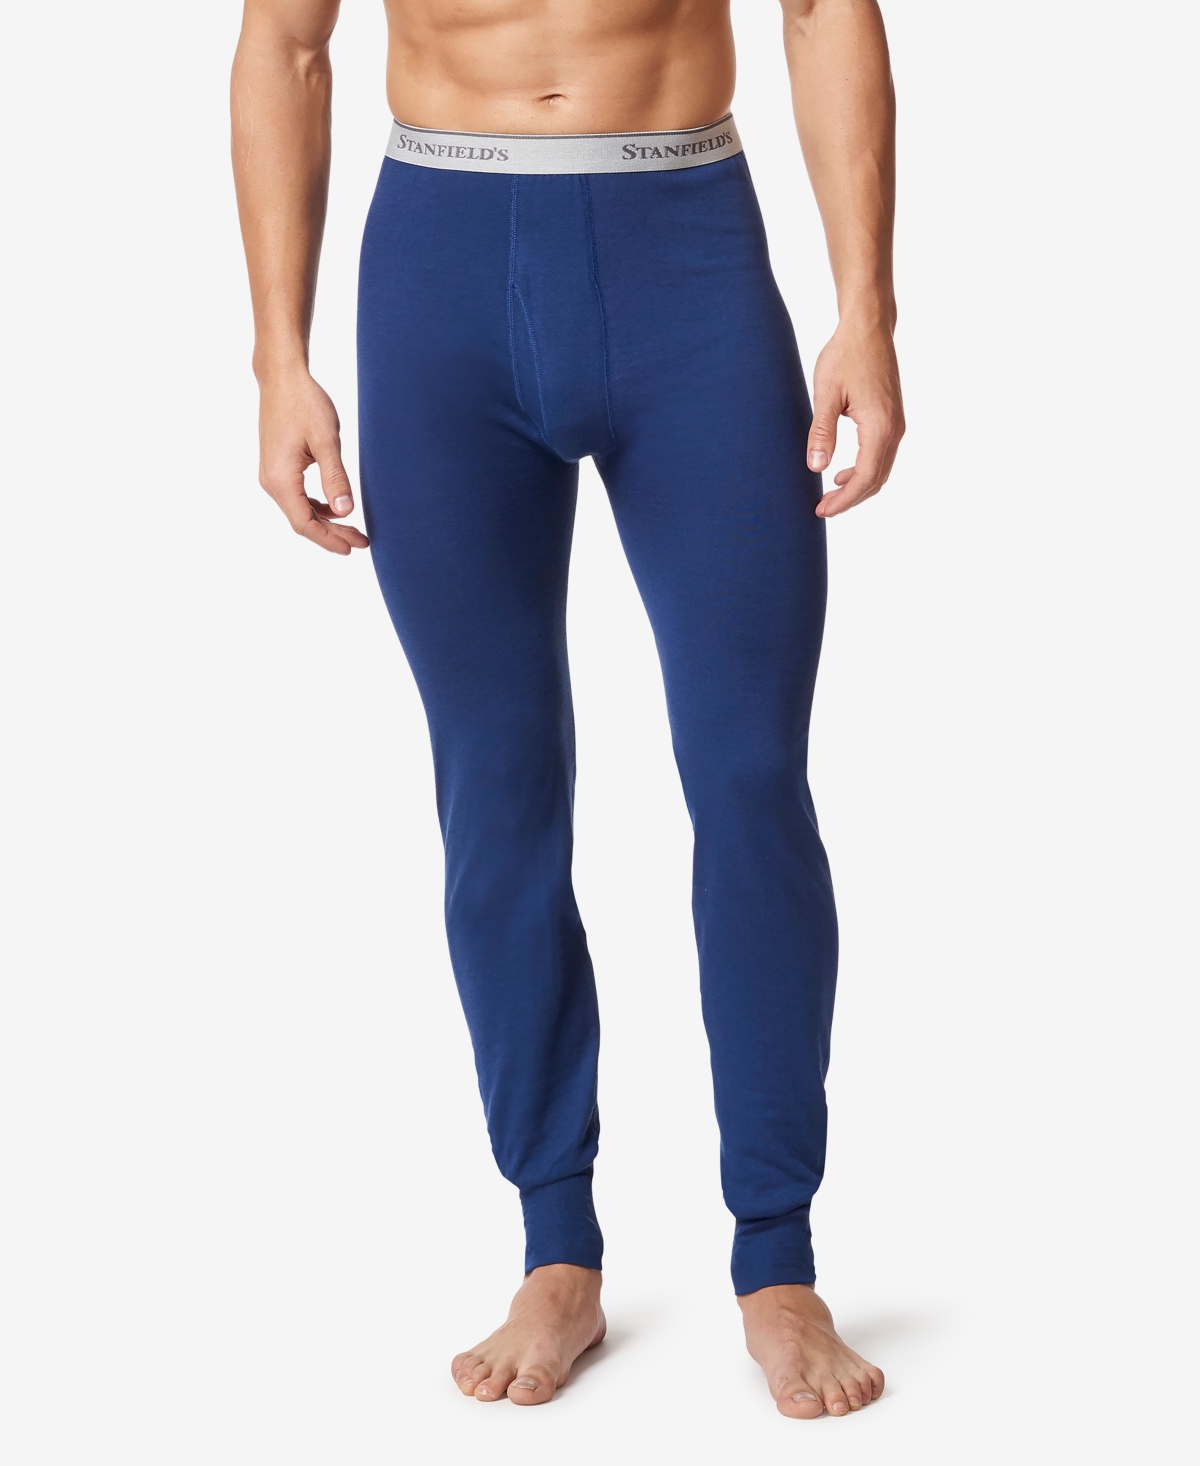 Men's 2 Layer Cotton Blend Thermal Long Johns Underwear - Real Blue